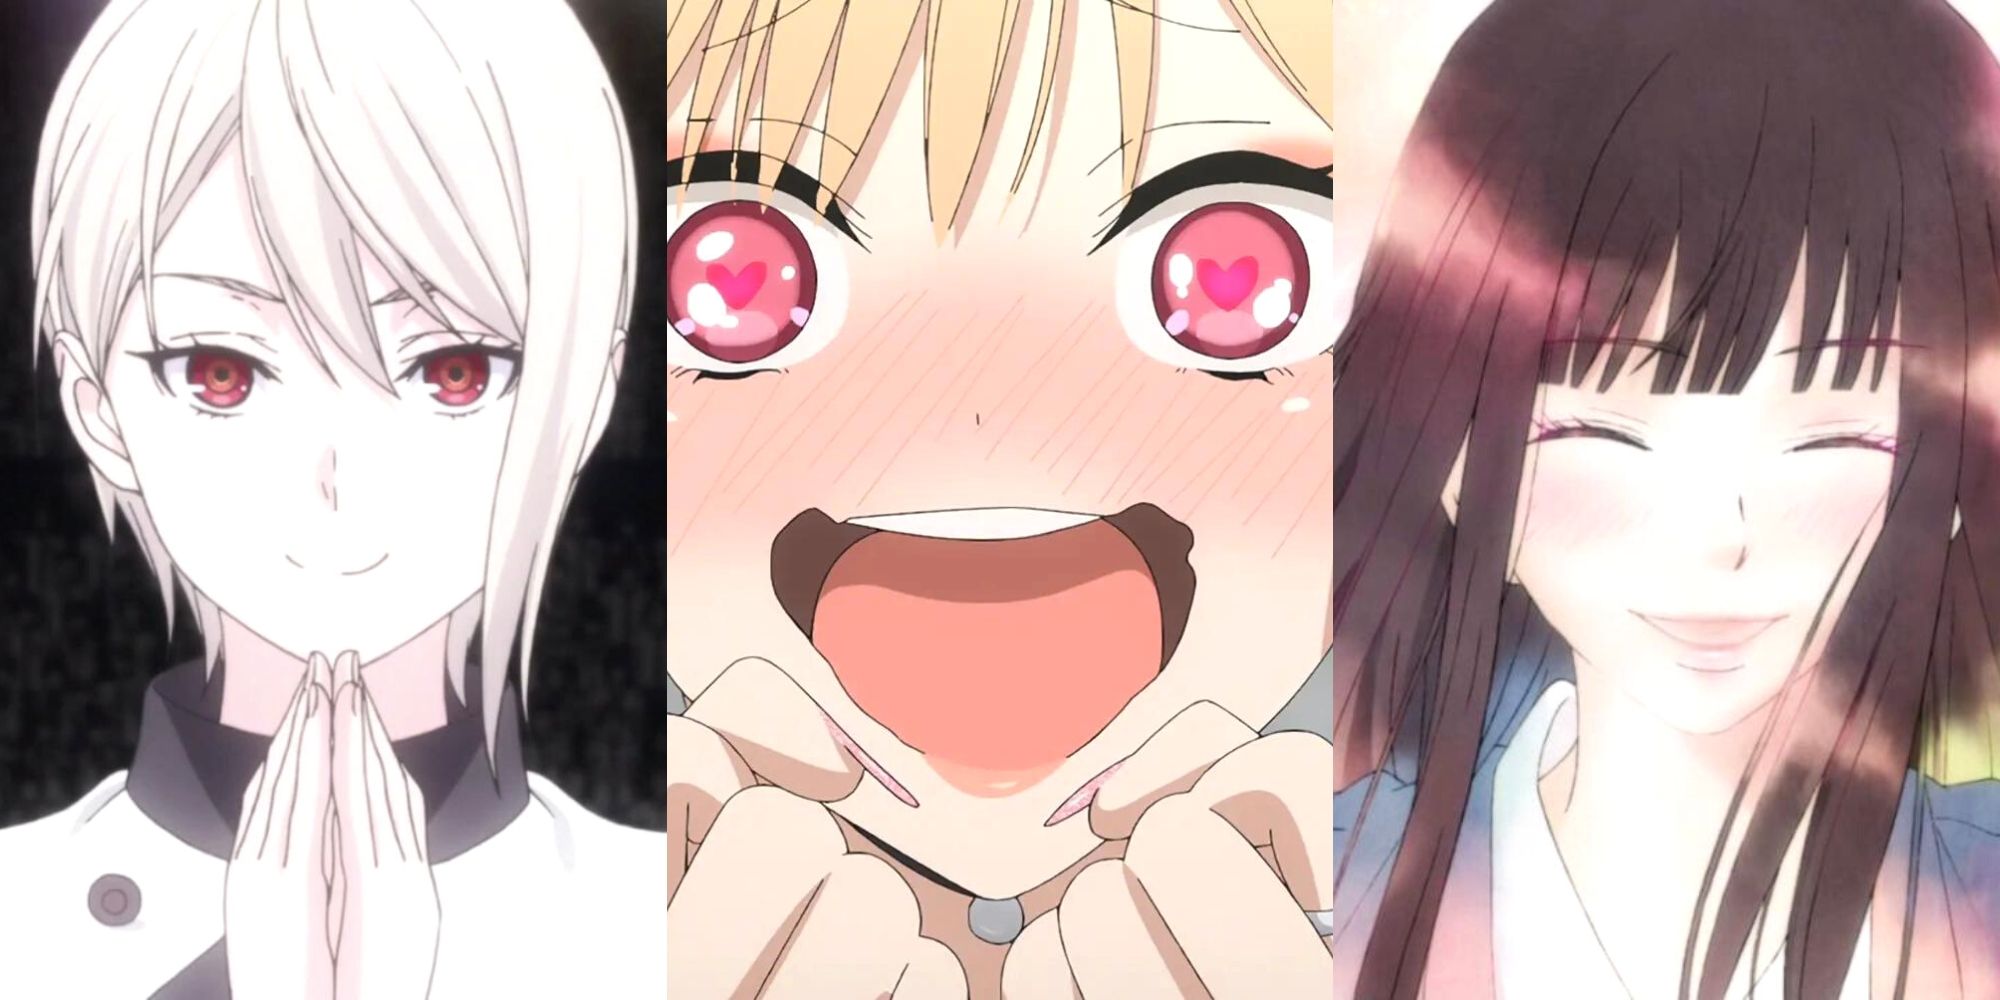 Best Waifus 2019: Who Are This Year's Best Female Anime Characters?